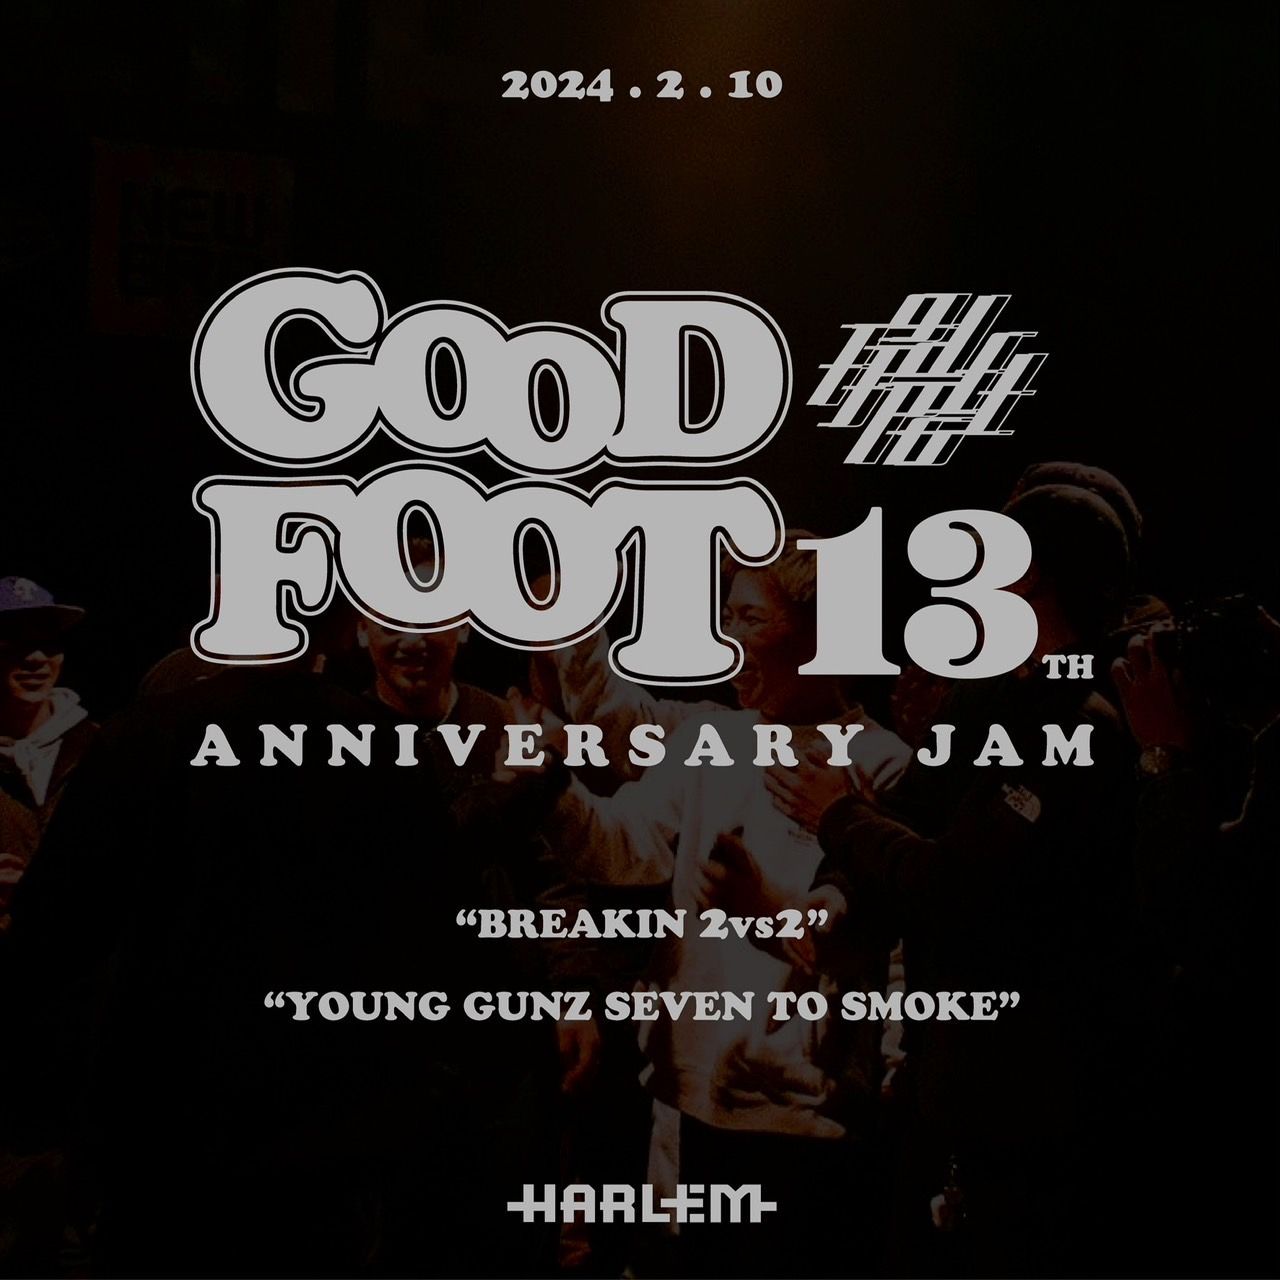 ENTER THE STAGE】 GOOD FOOT 13th Anniversary Jam